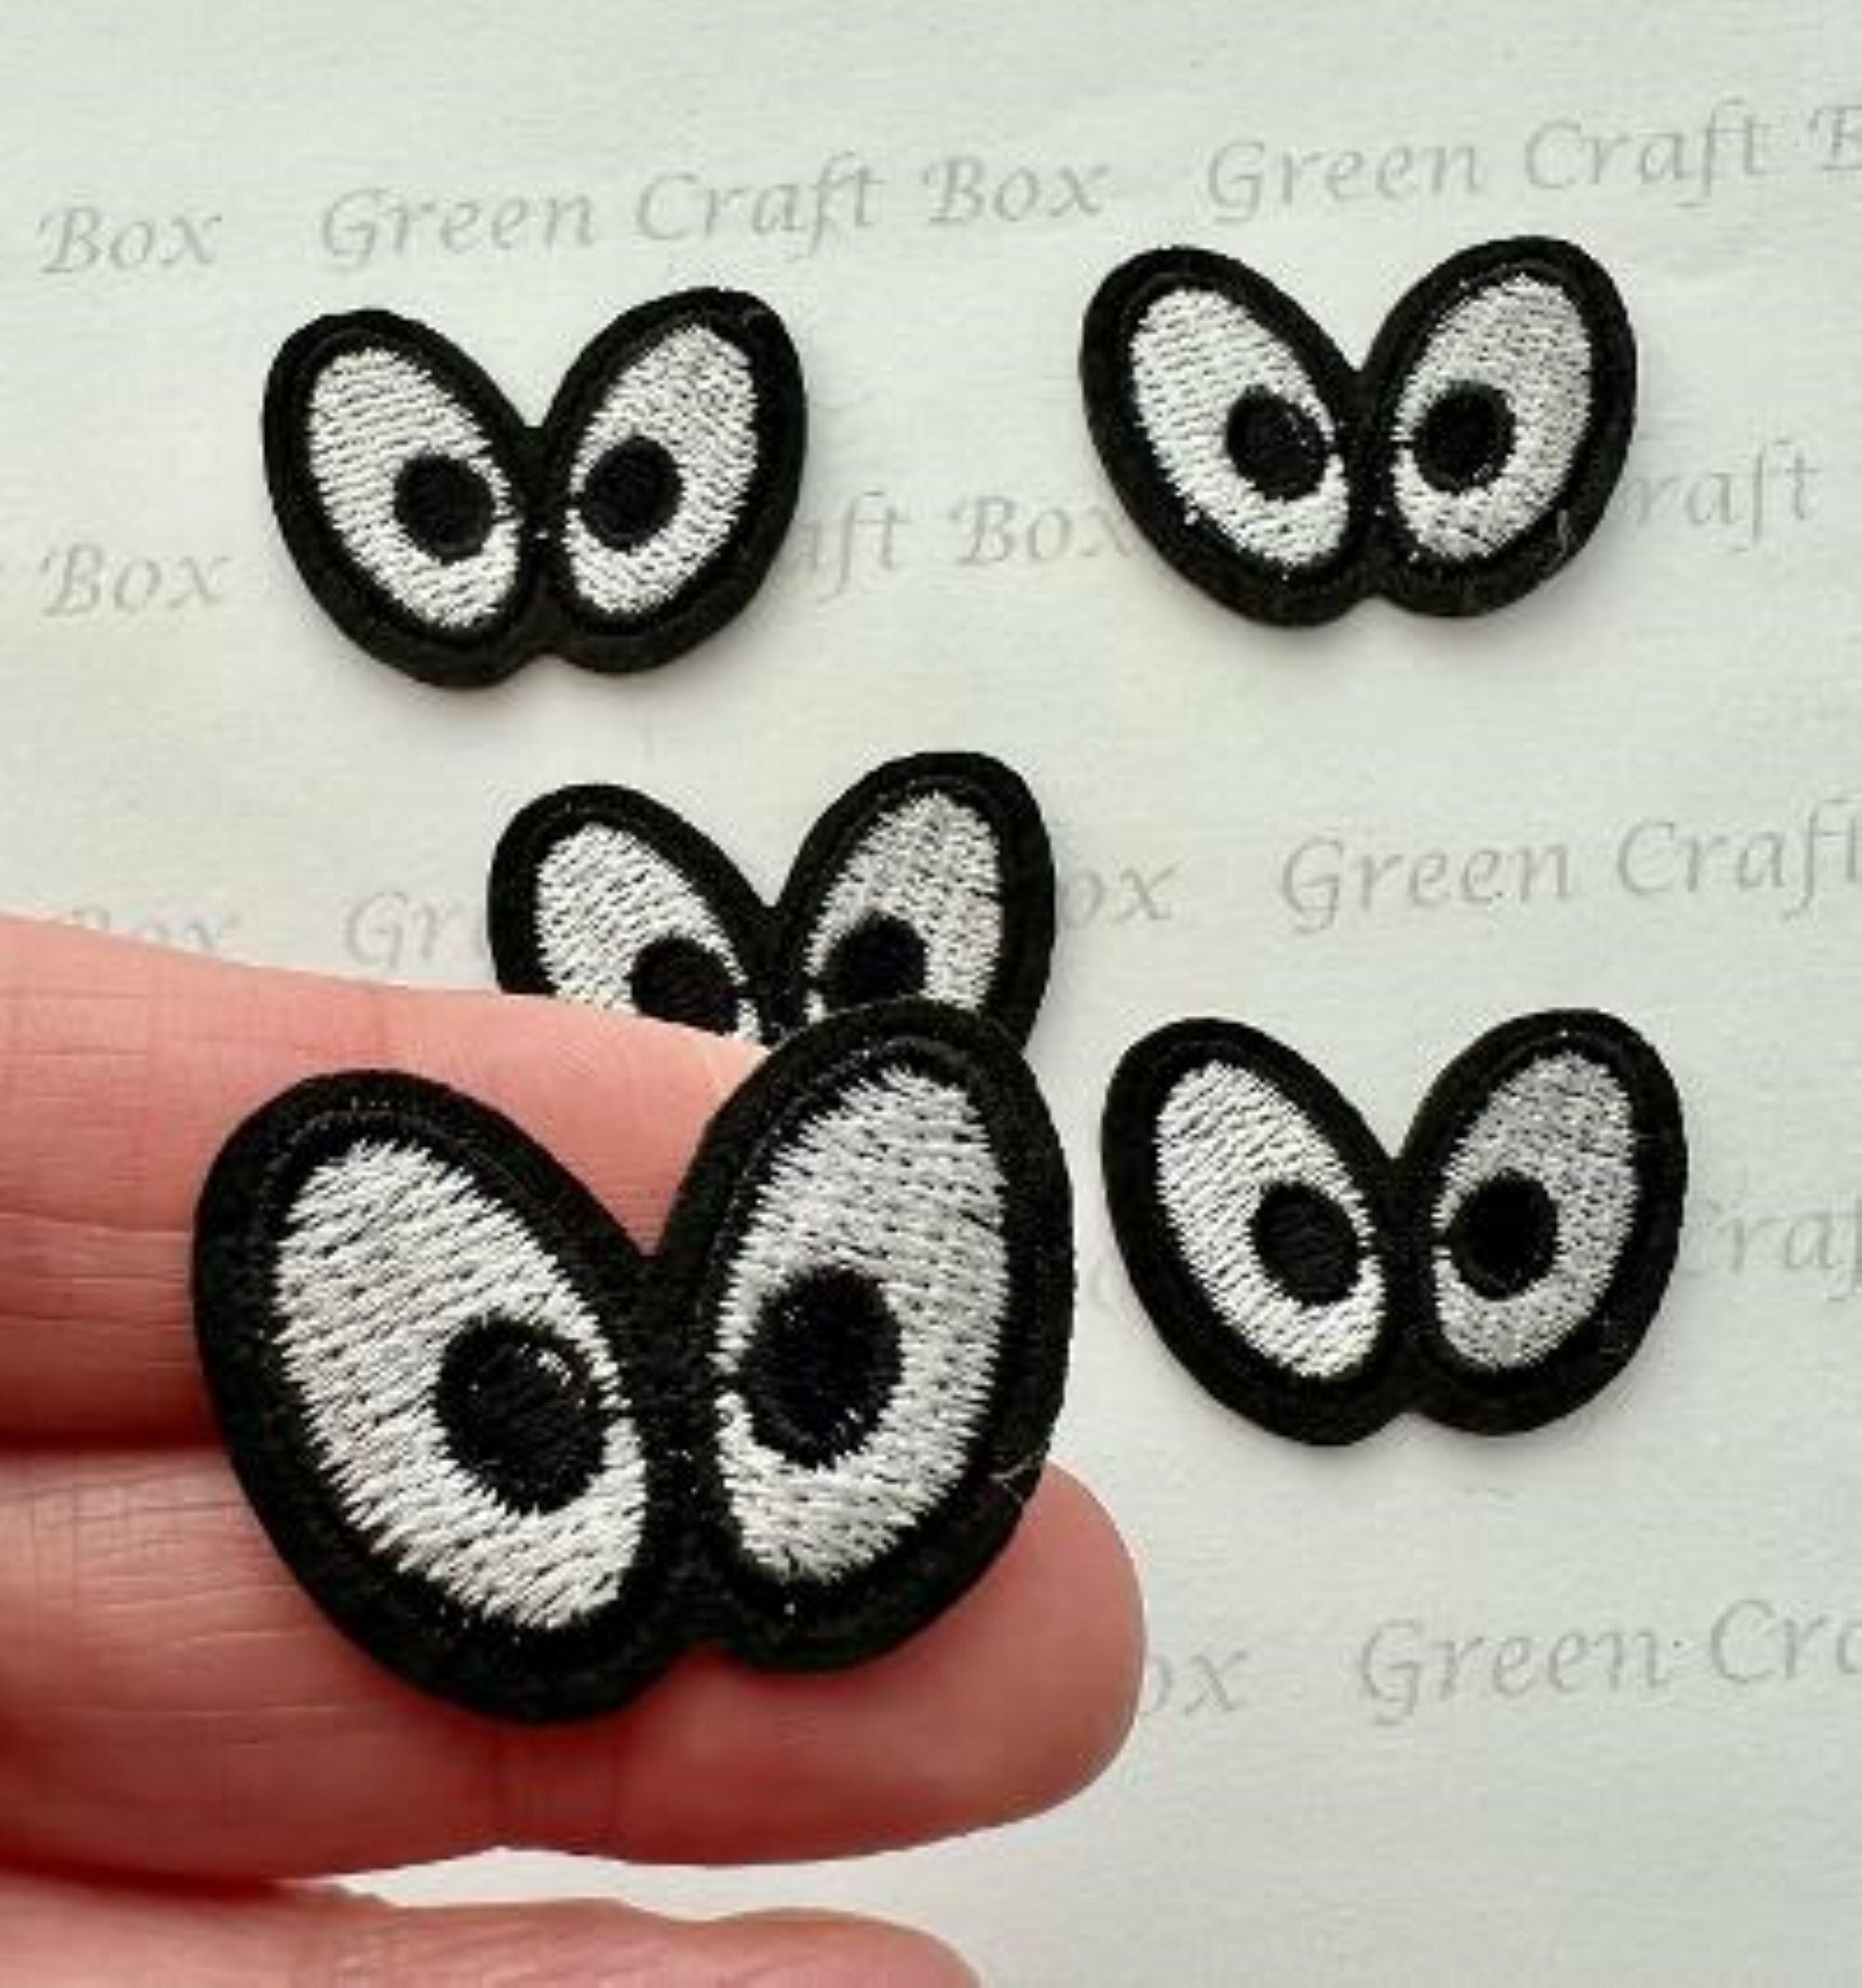 6 Pair Sew on Eyes for Sewing Arts and Crafts. Craft Eyes for Use in Teddy  Bears, Dolls, Plush Animals, Fairy, Pixie, Fish Lures, SORP-2 